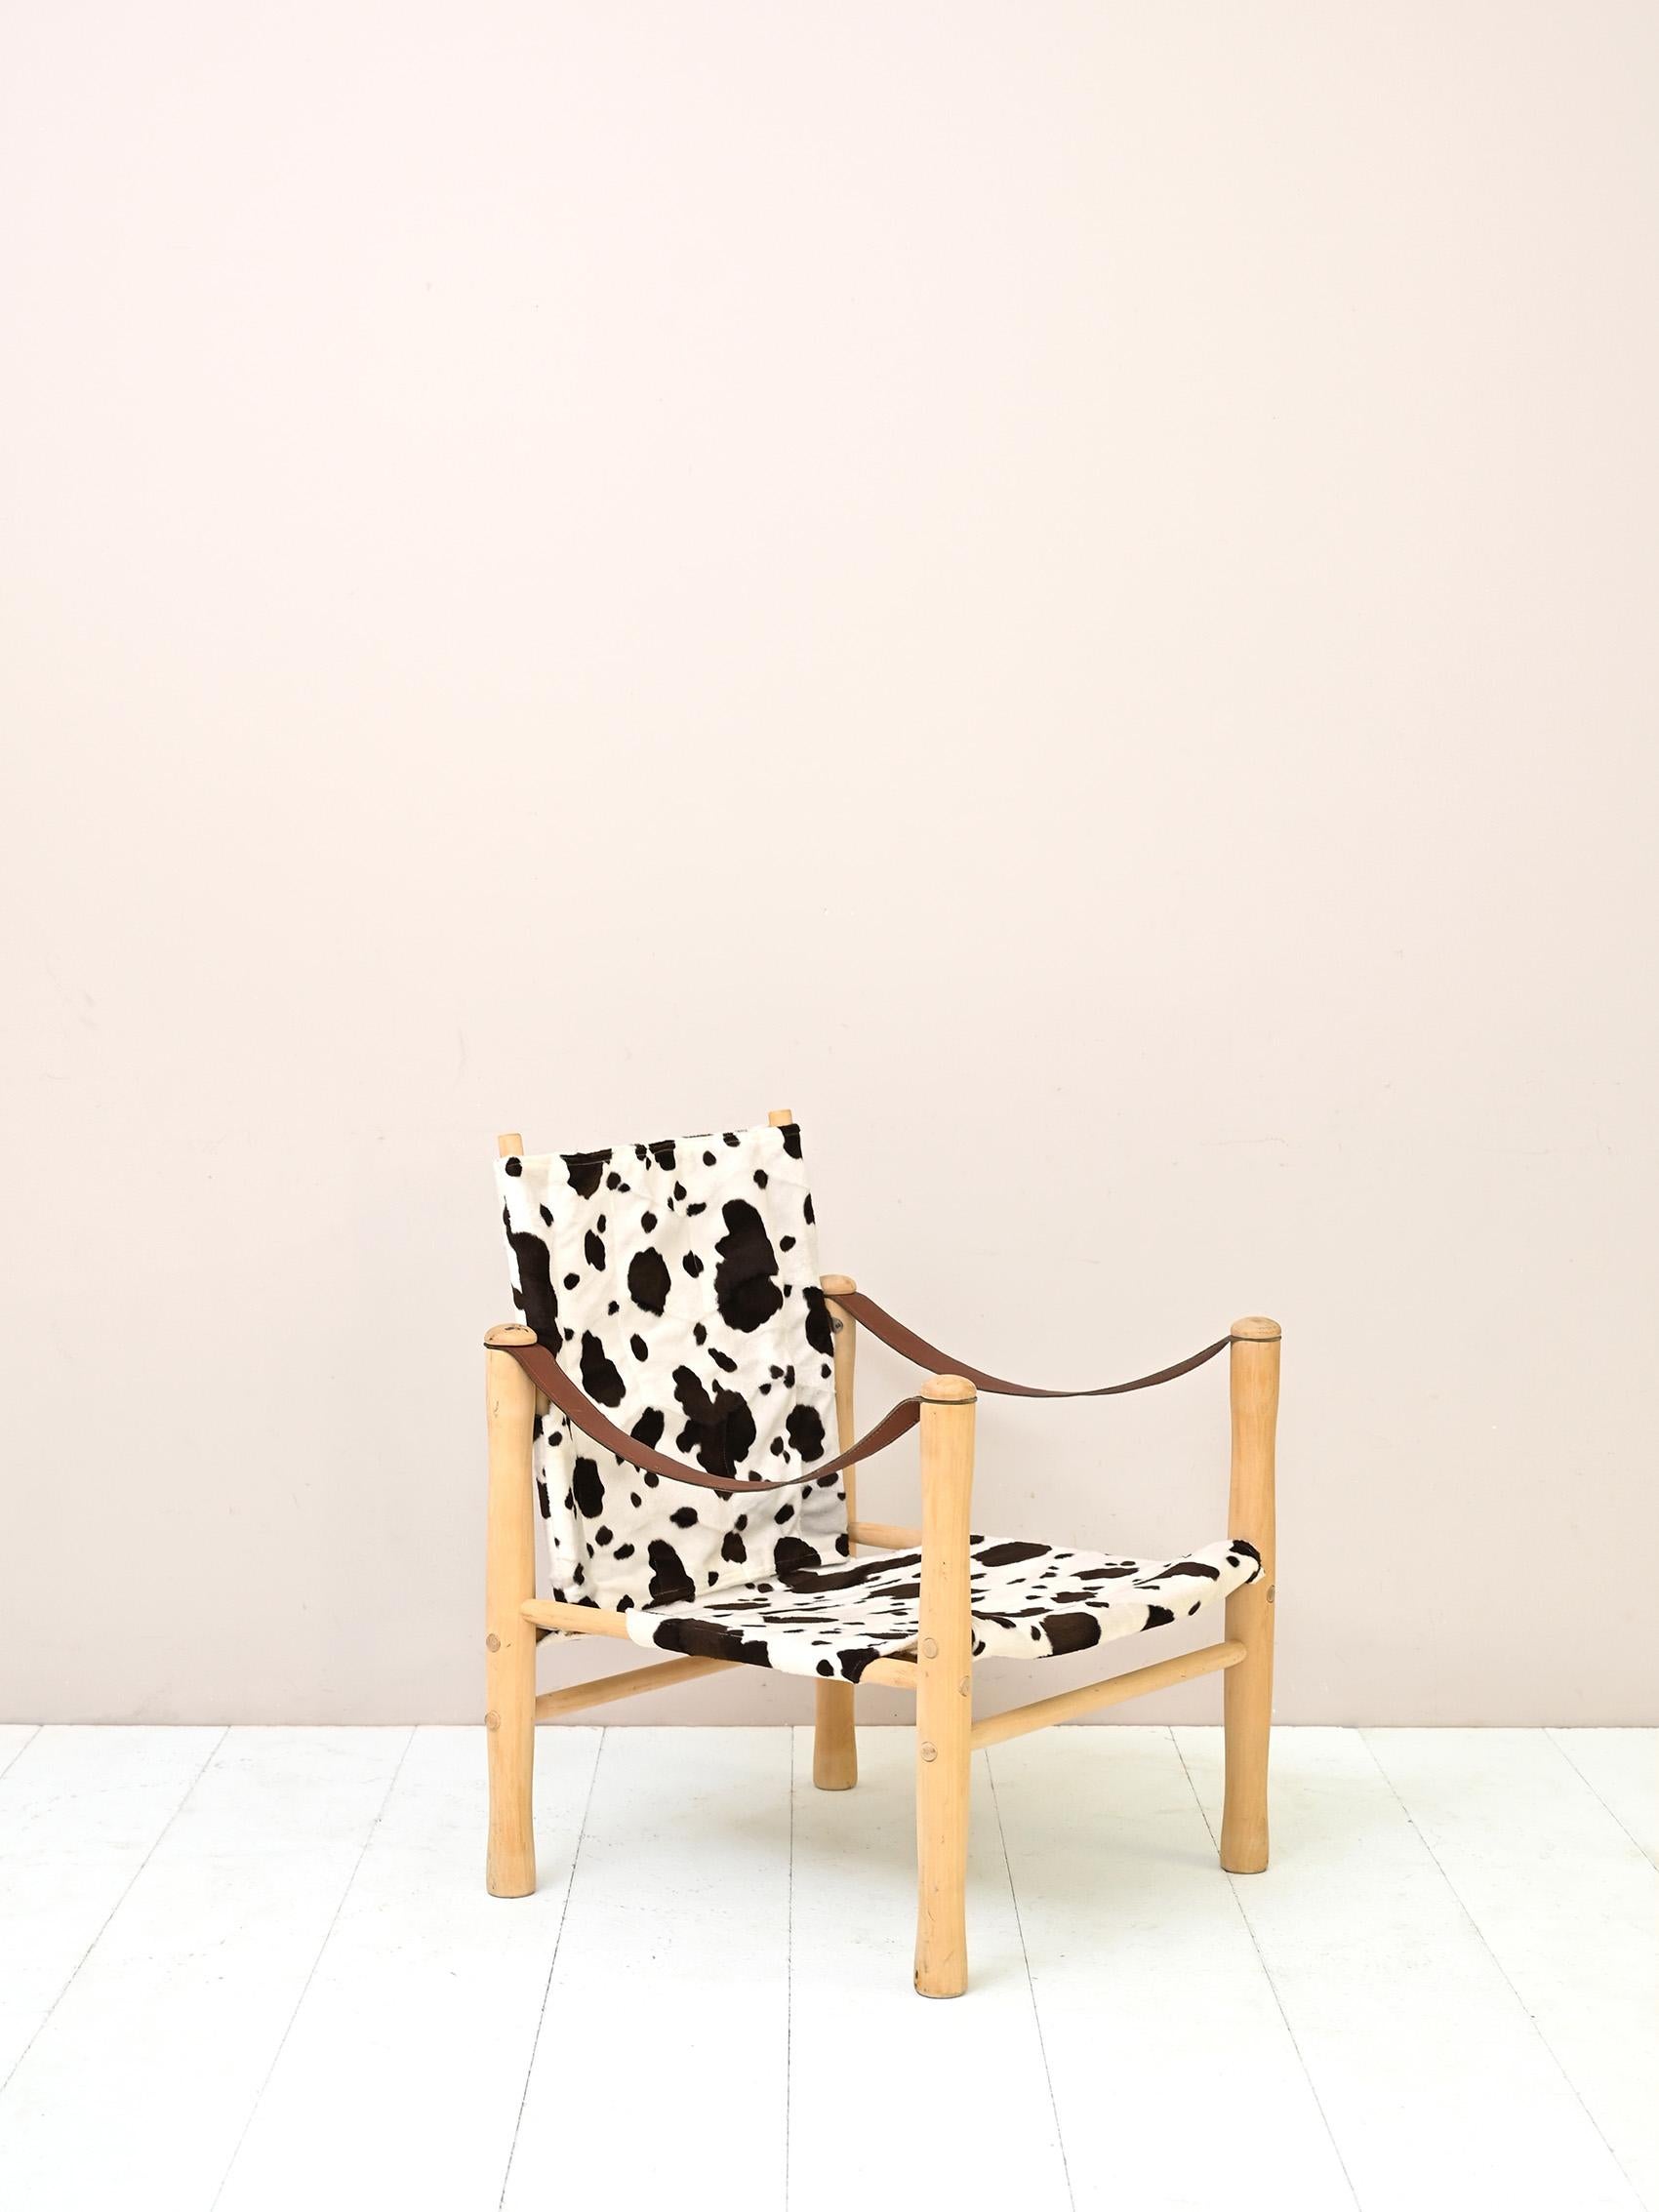 Vintage armchair made of wood and speckled fabric produced by the company Nordiska Kompaniet.
Particular seat with movable backrest. A piece of original and modern design, capable of giving
character to any environment.

The frame is made of